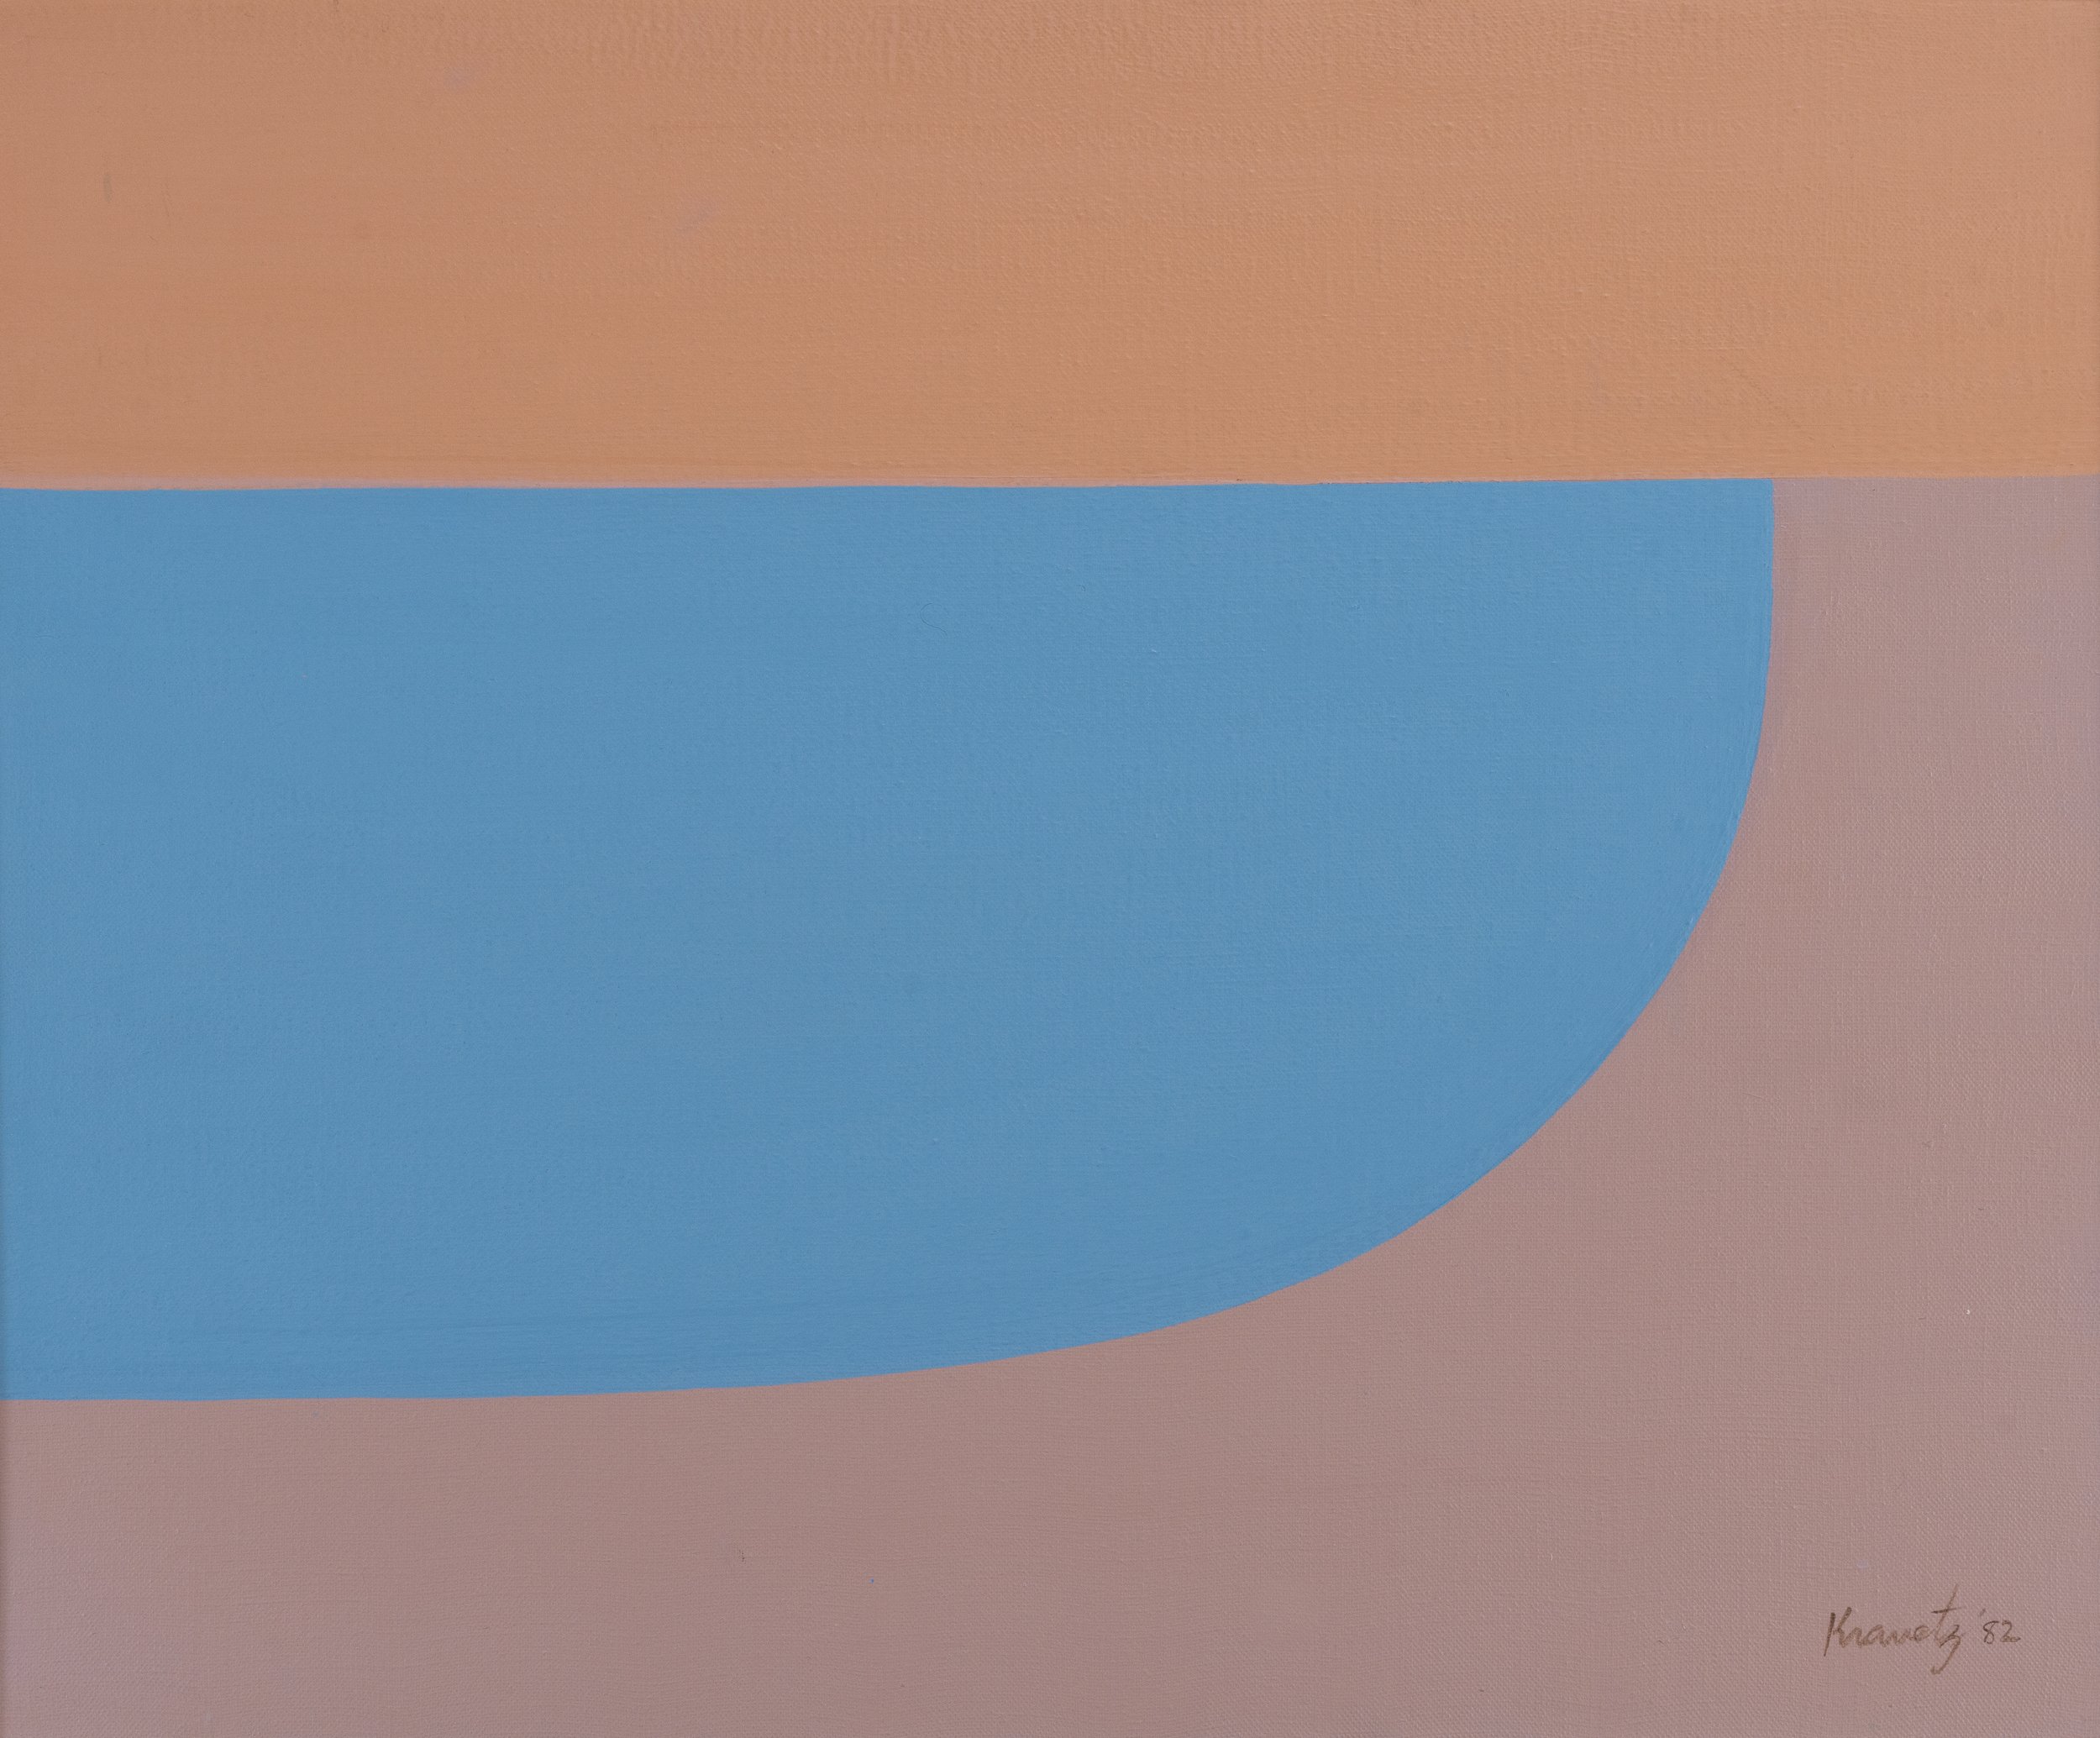 Abstract Shoreline, 1982, acrylic on canvas, 20x24 inches